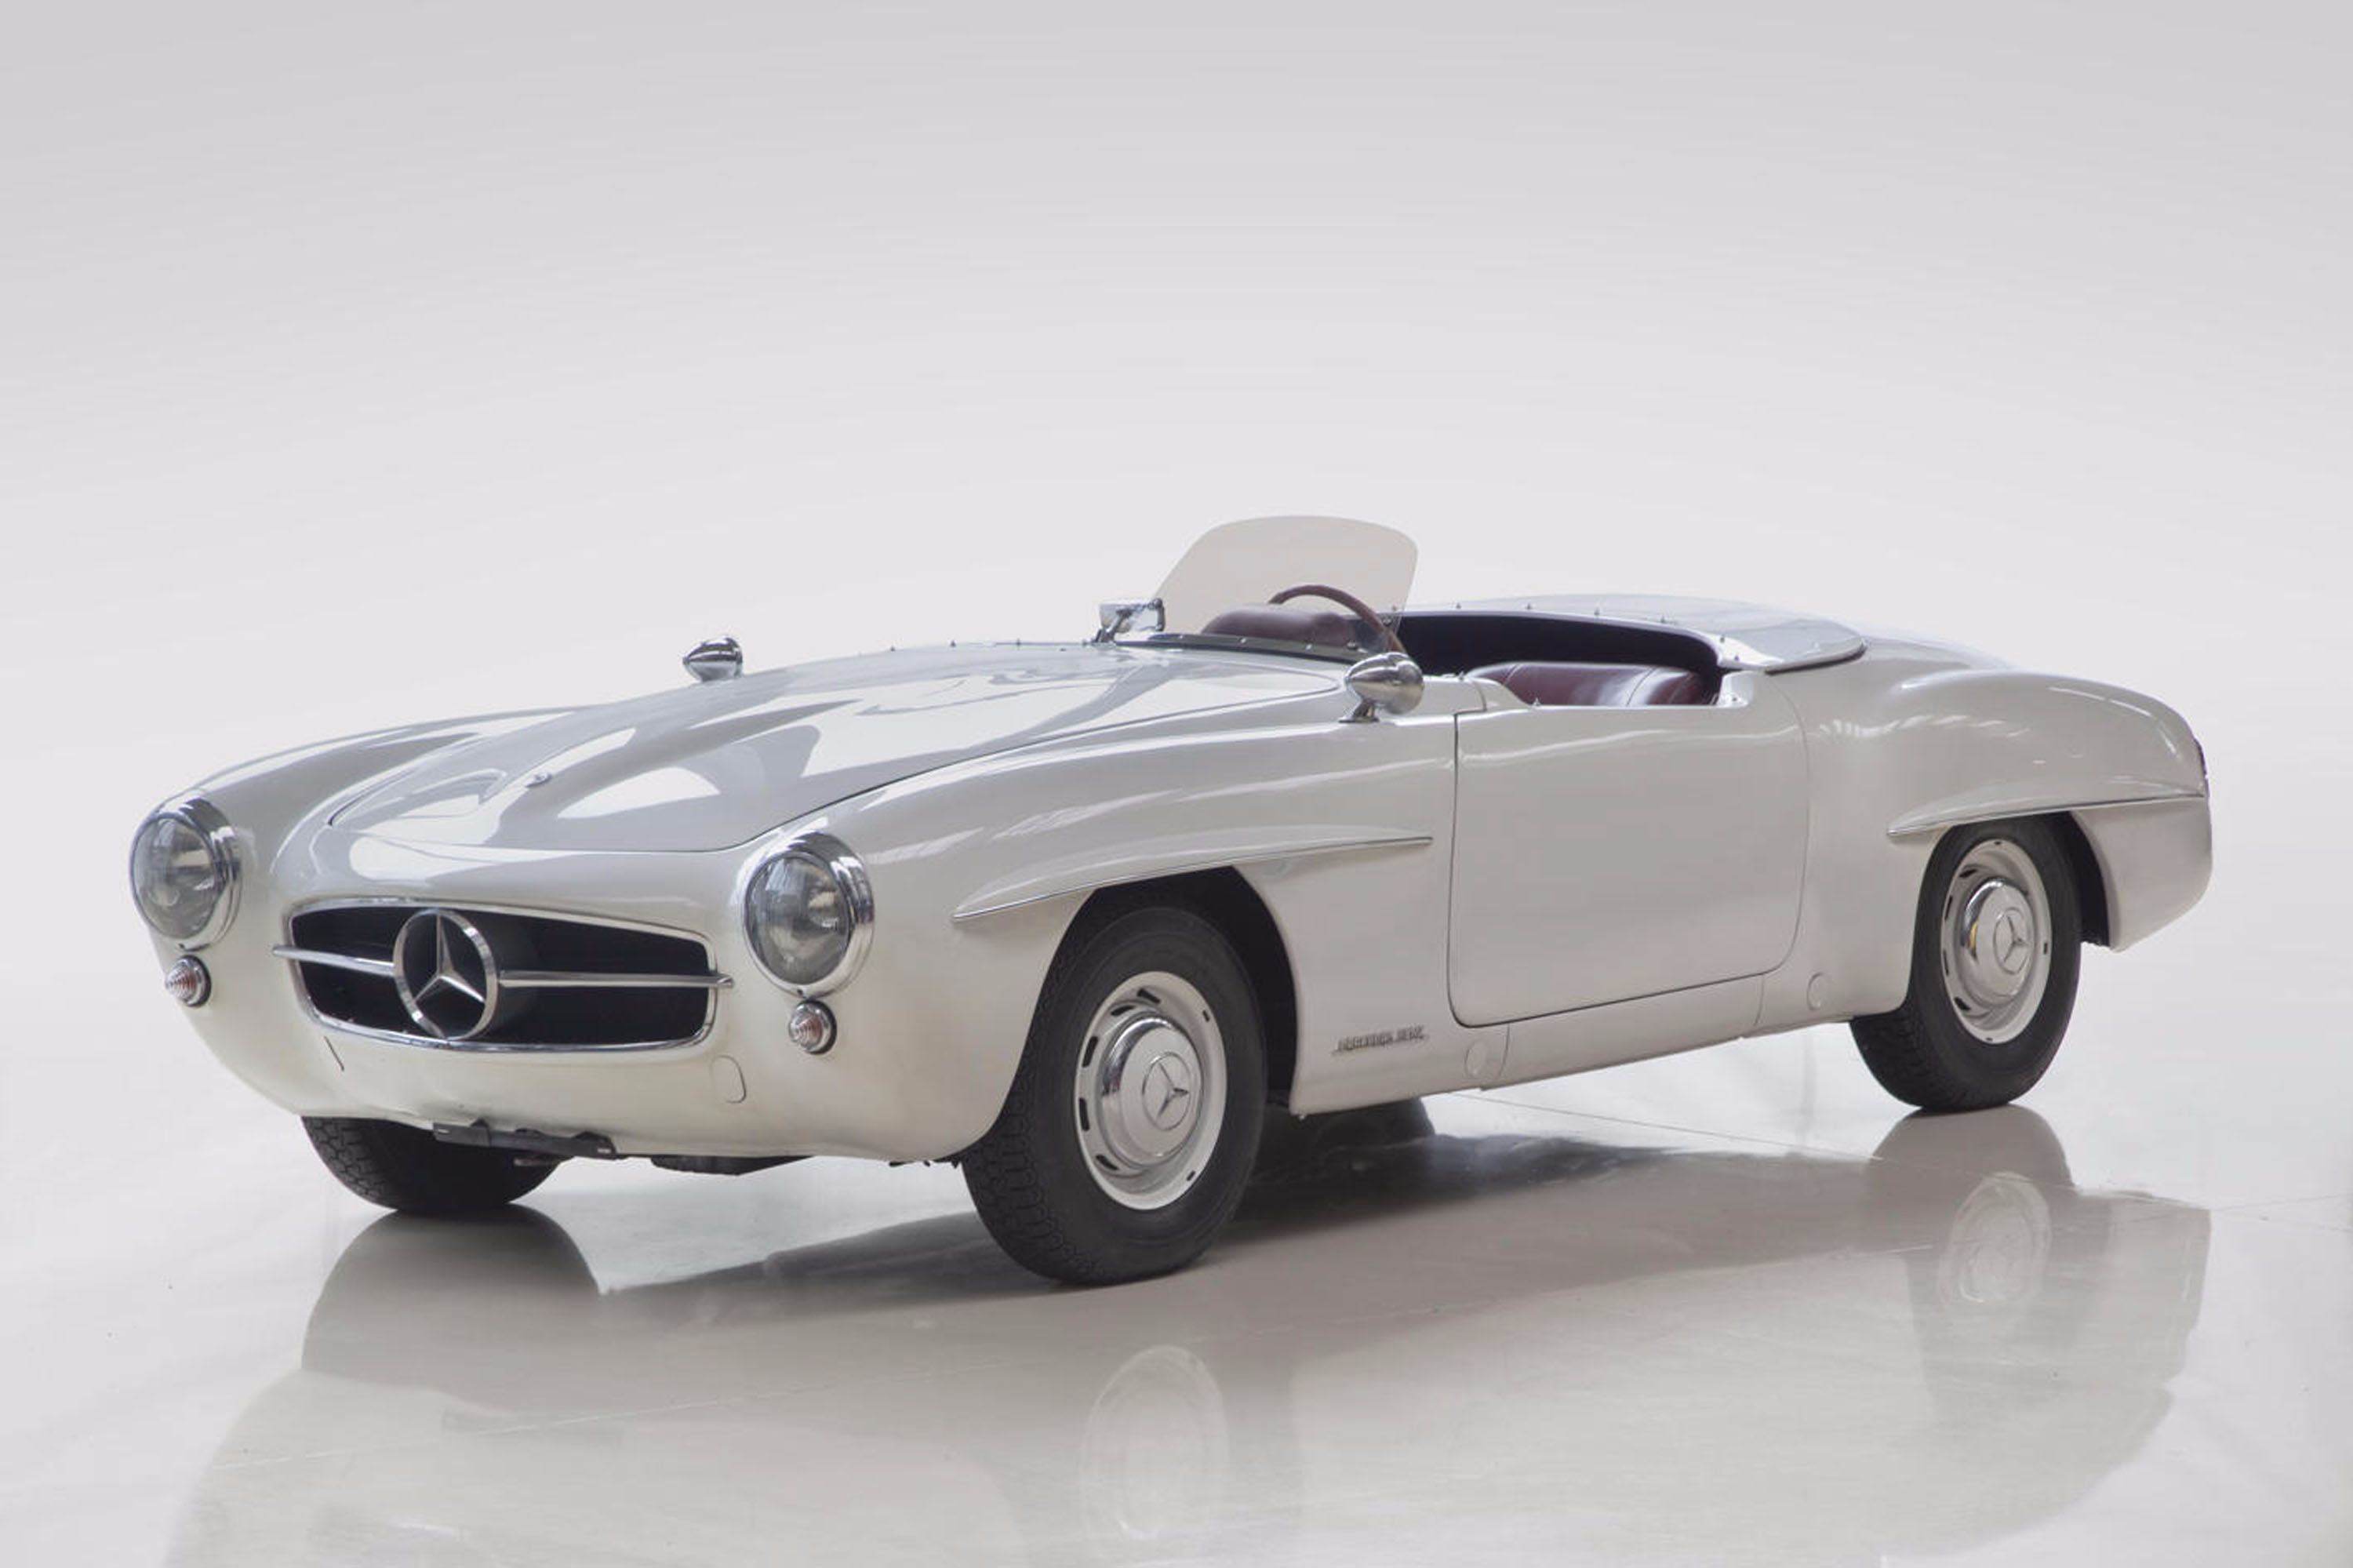 Havoc Geurig versus This might be the sexiest Mercedes-Benz 190SL ever